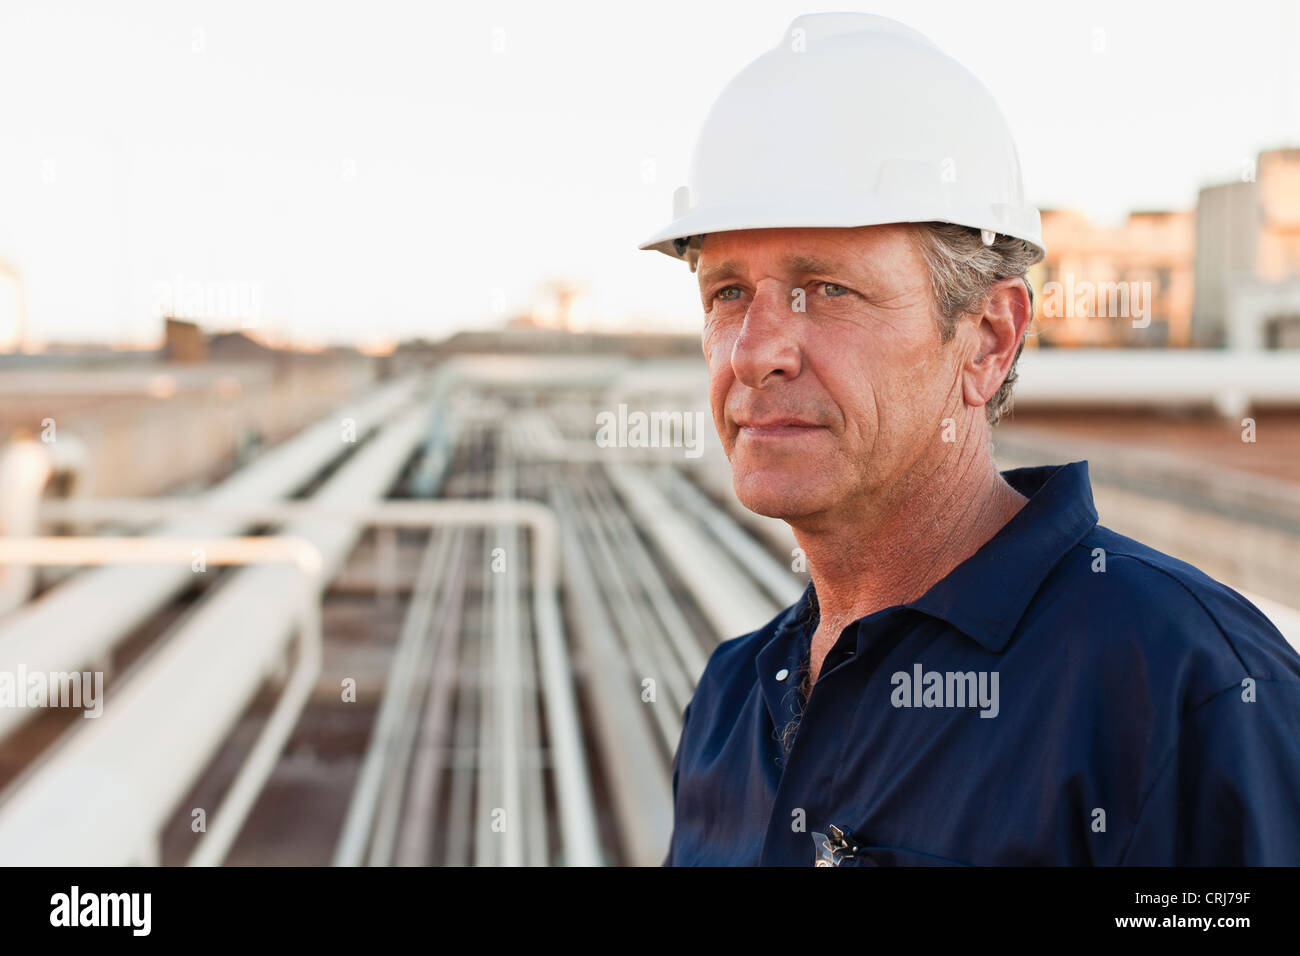 Close up of worker at oil refinery Stock Photo